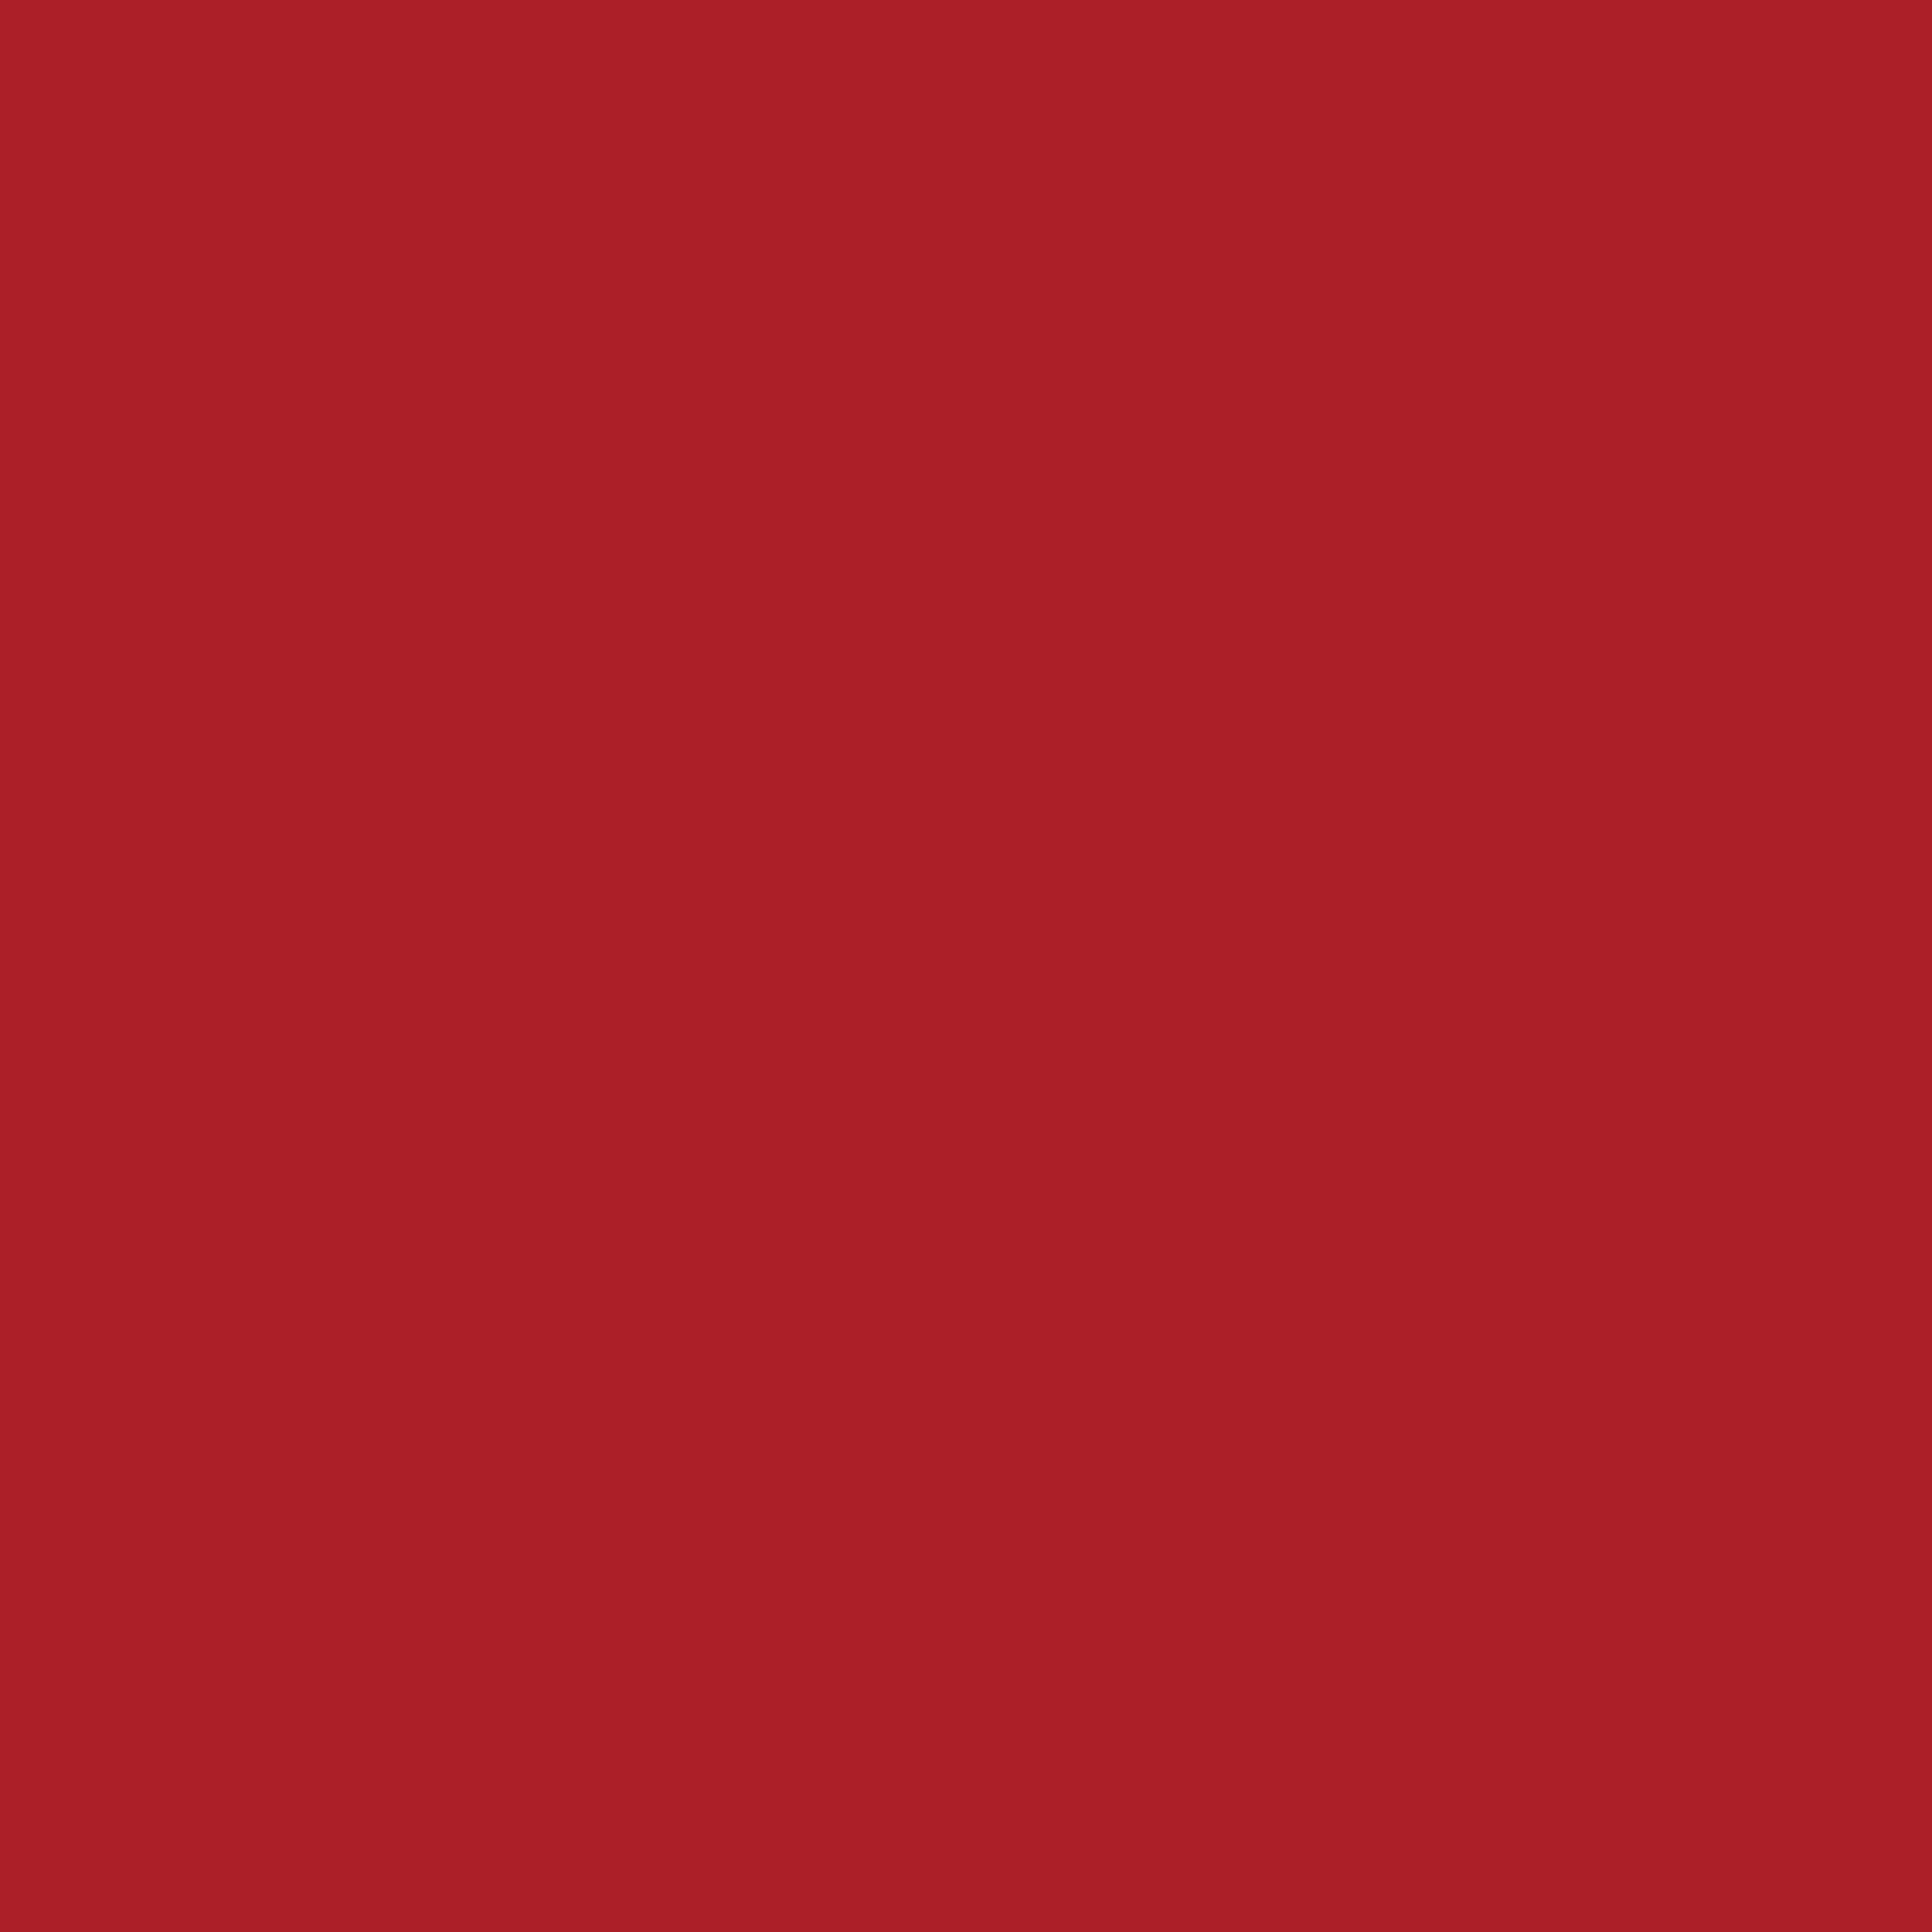 2732x2732 Upsdell Red Solid Color Background